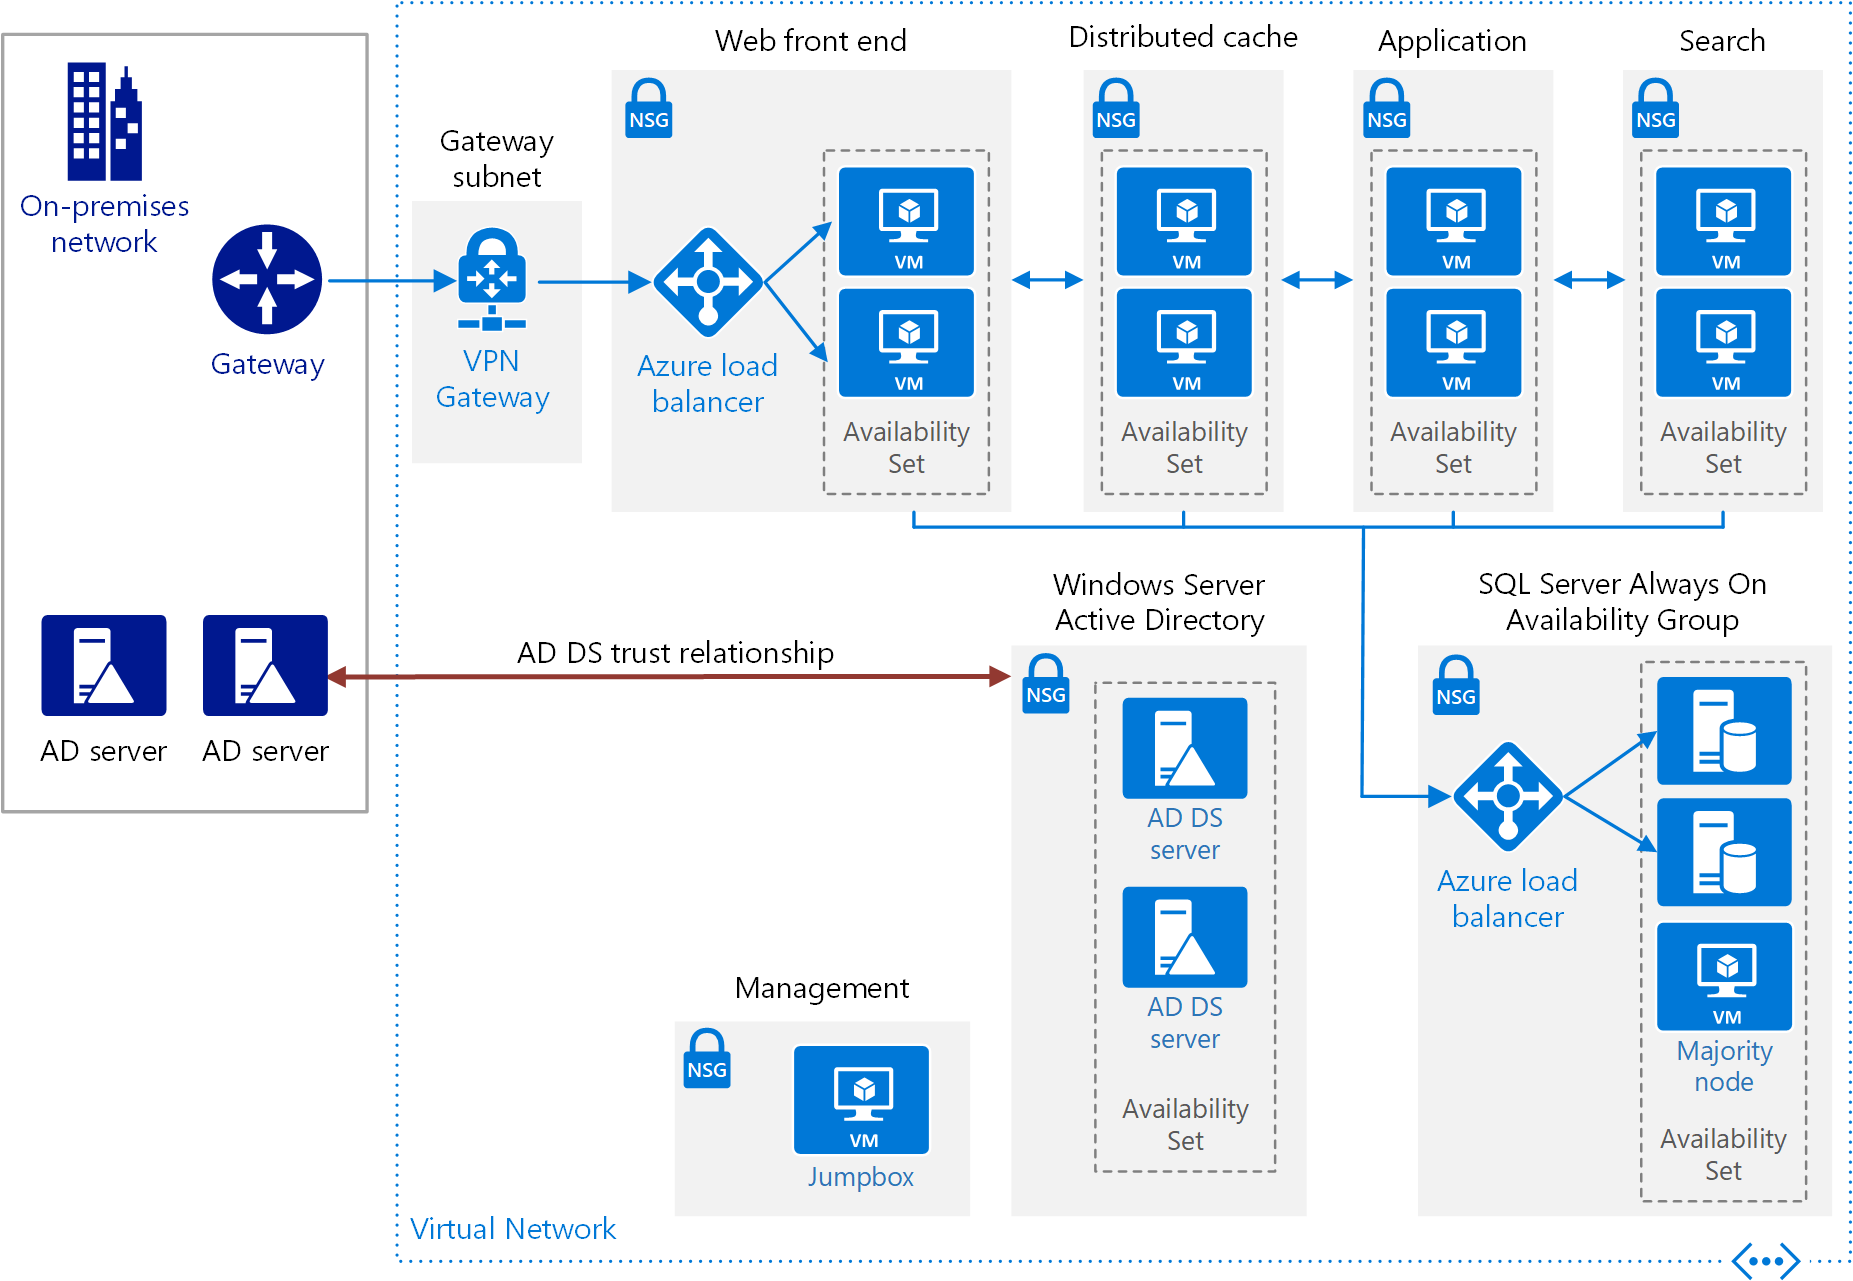 You can deploy this SharePoint infrastructure in Azure with a few clicks [Image Credit: Microsoft]